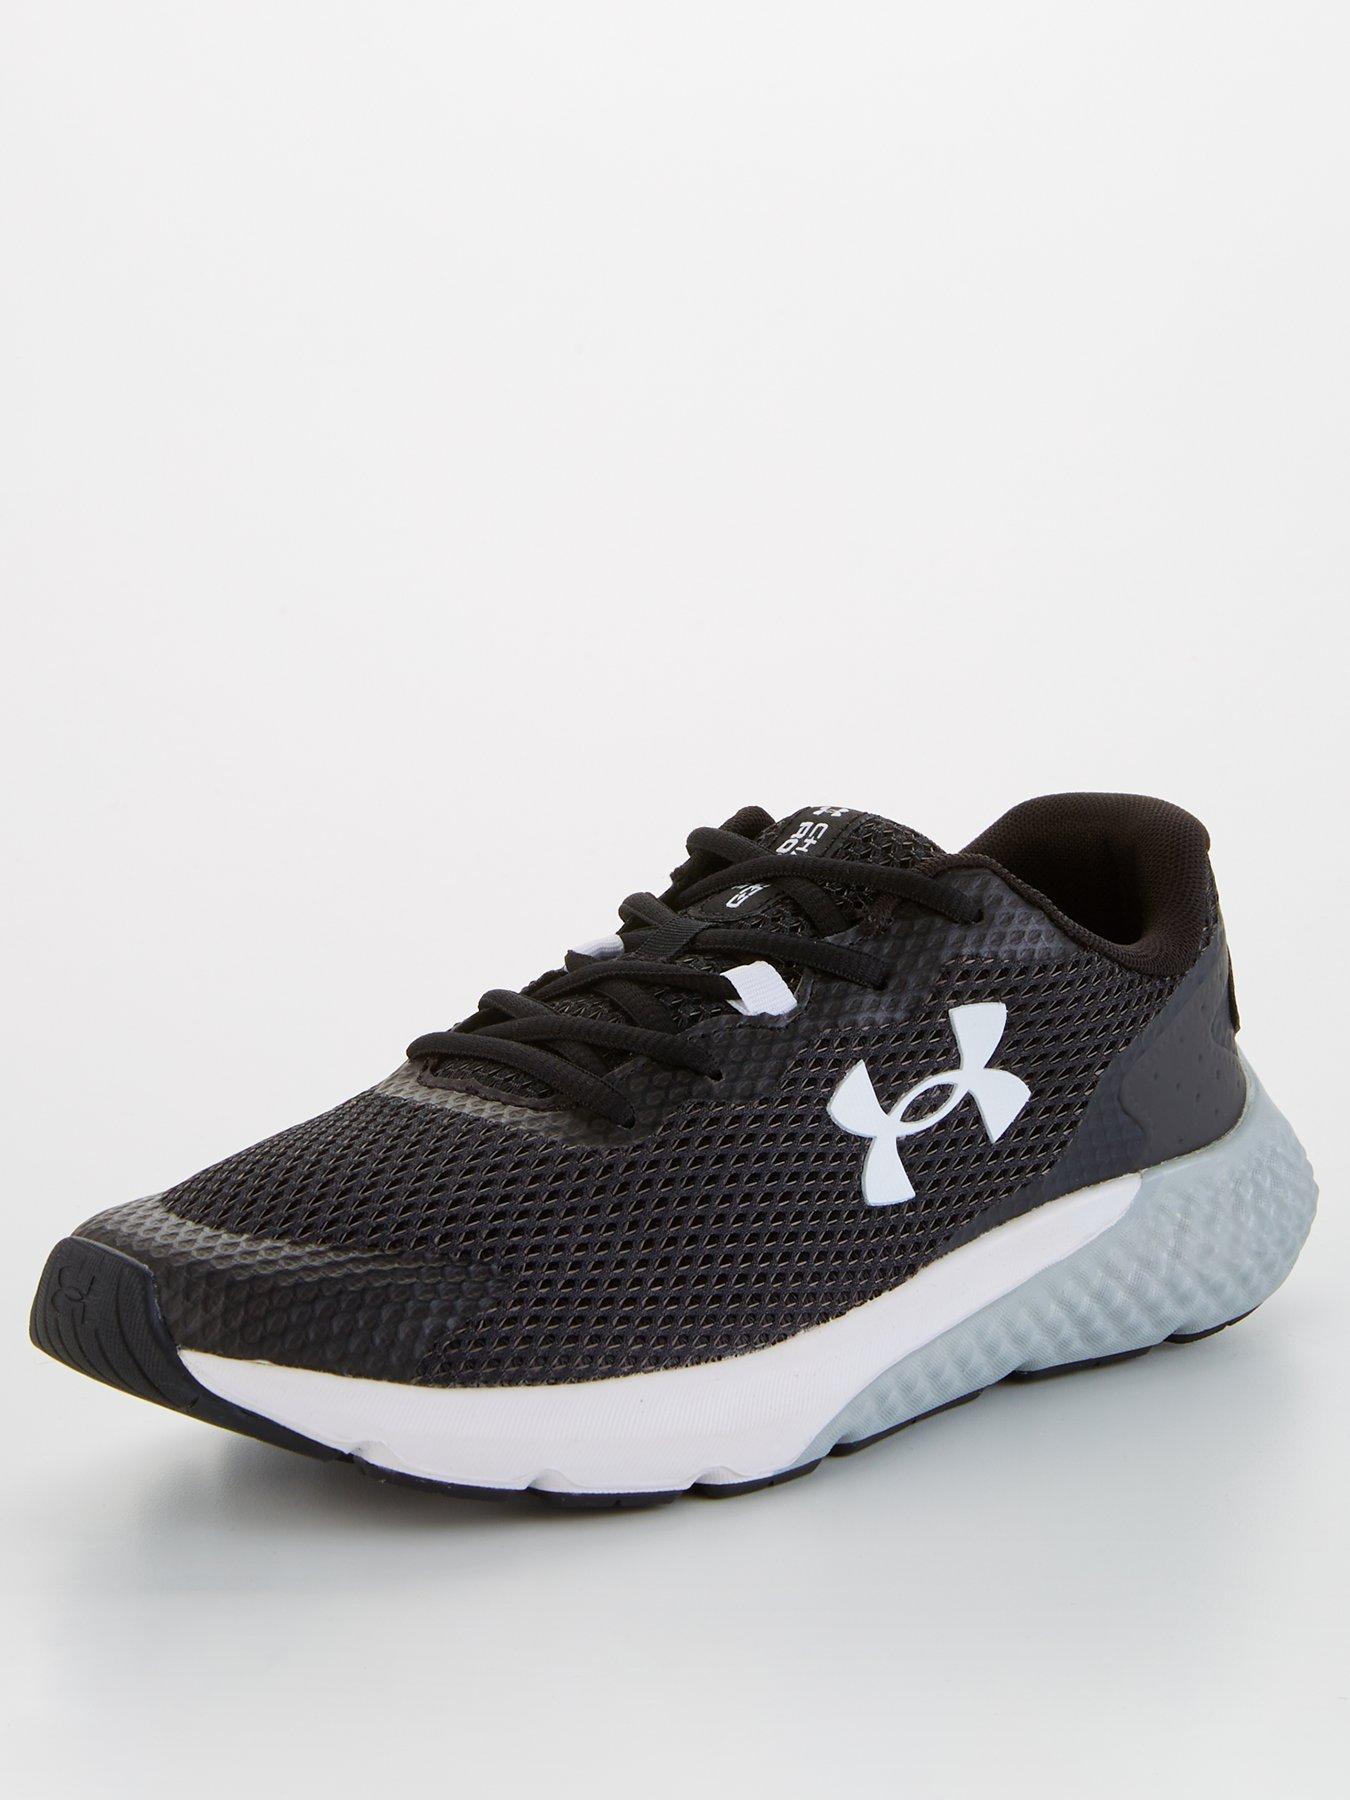 Under Armour Charged Rogue 3 trainers in black